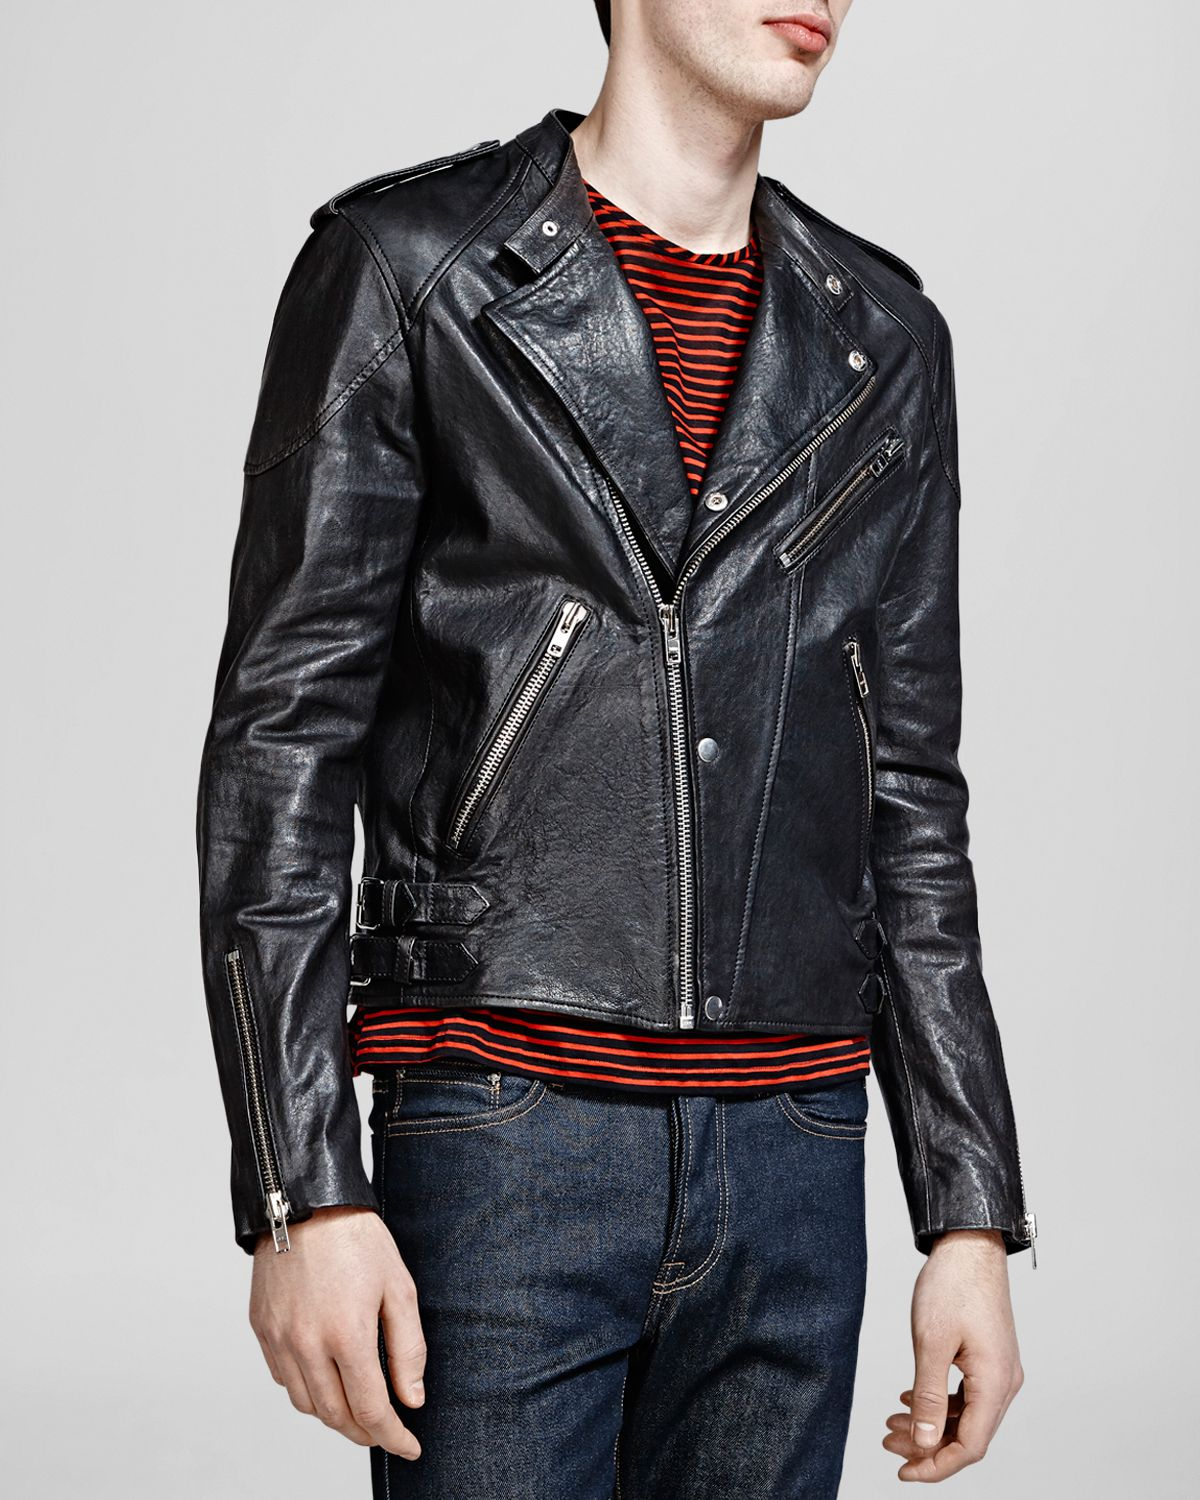 The Kooples Washed Moto Leather Jacket in Black for Men - Lyst